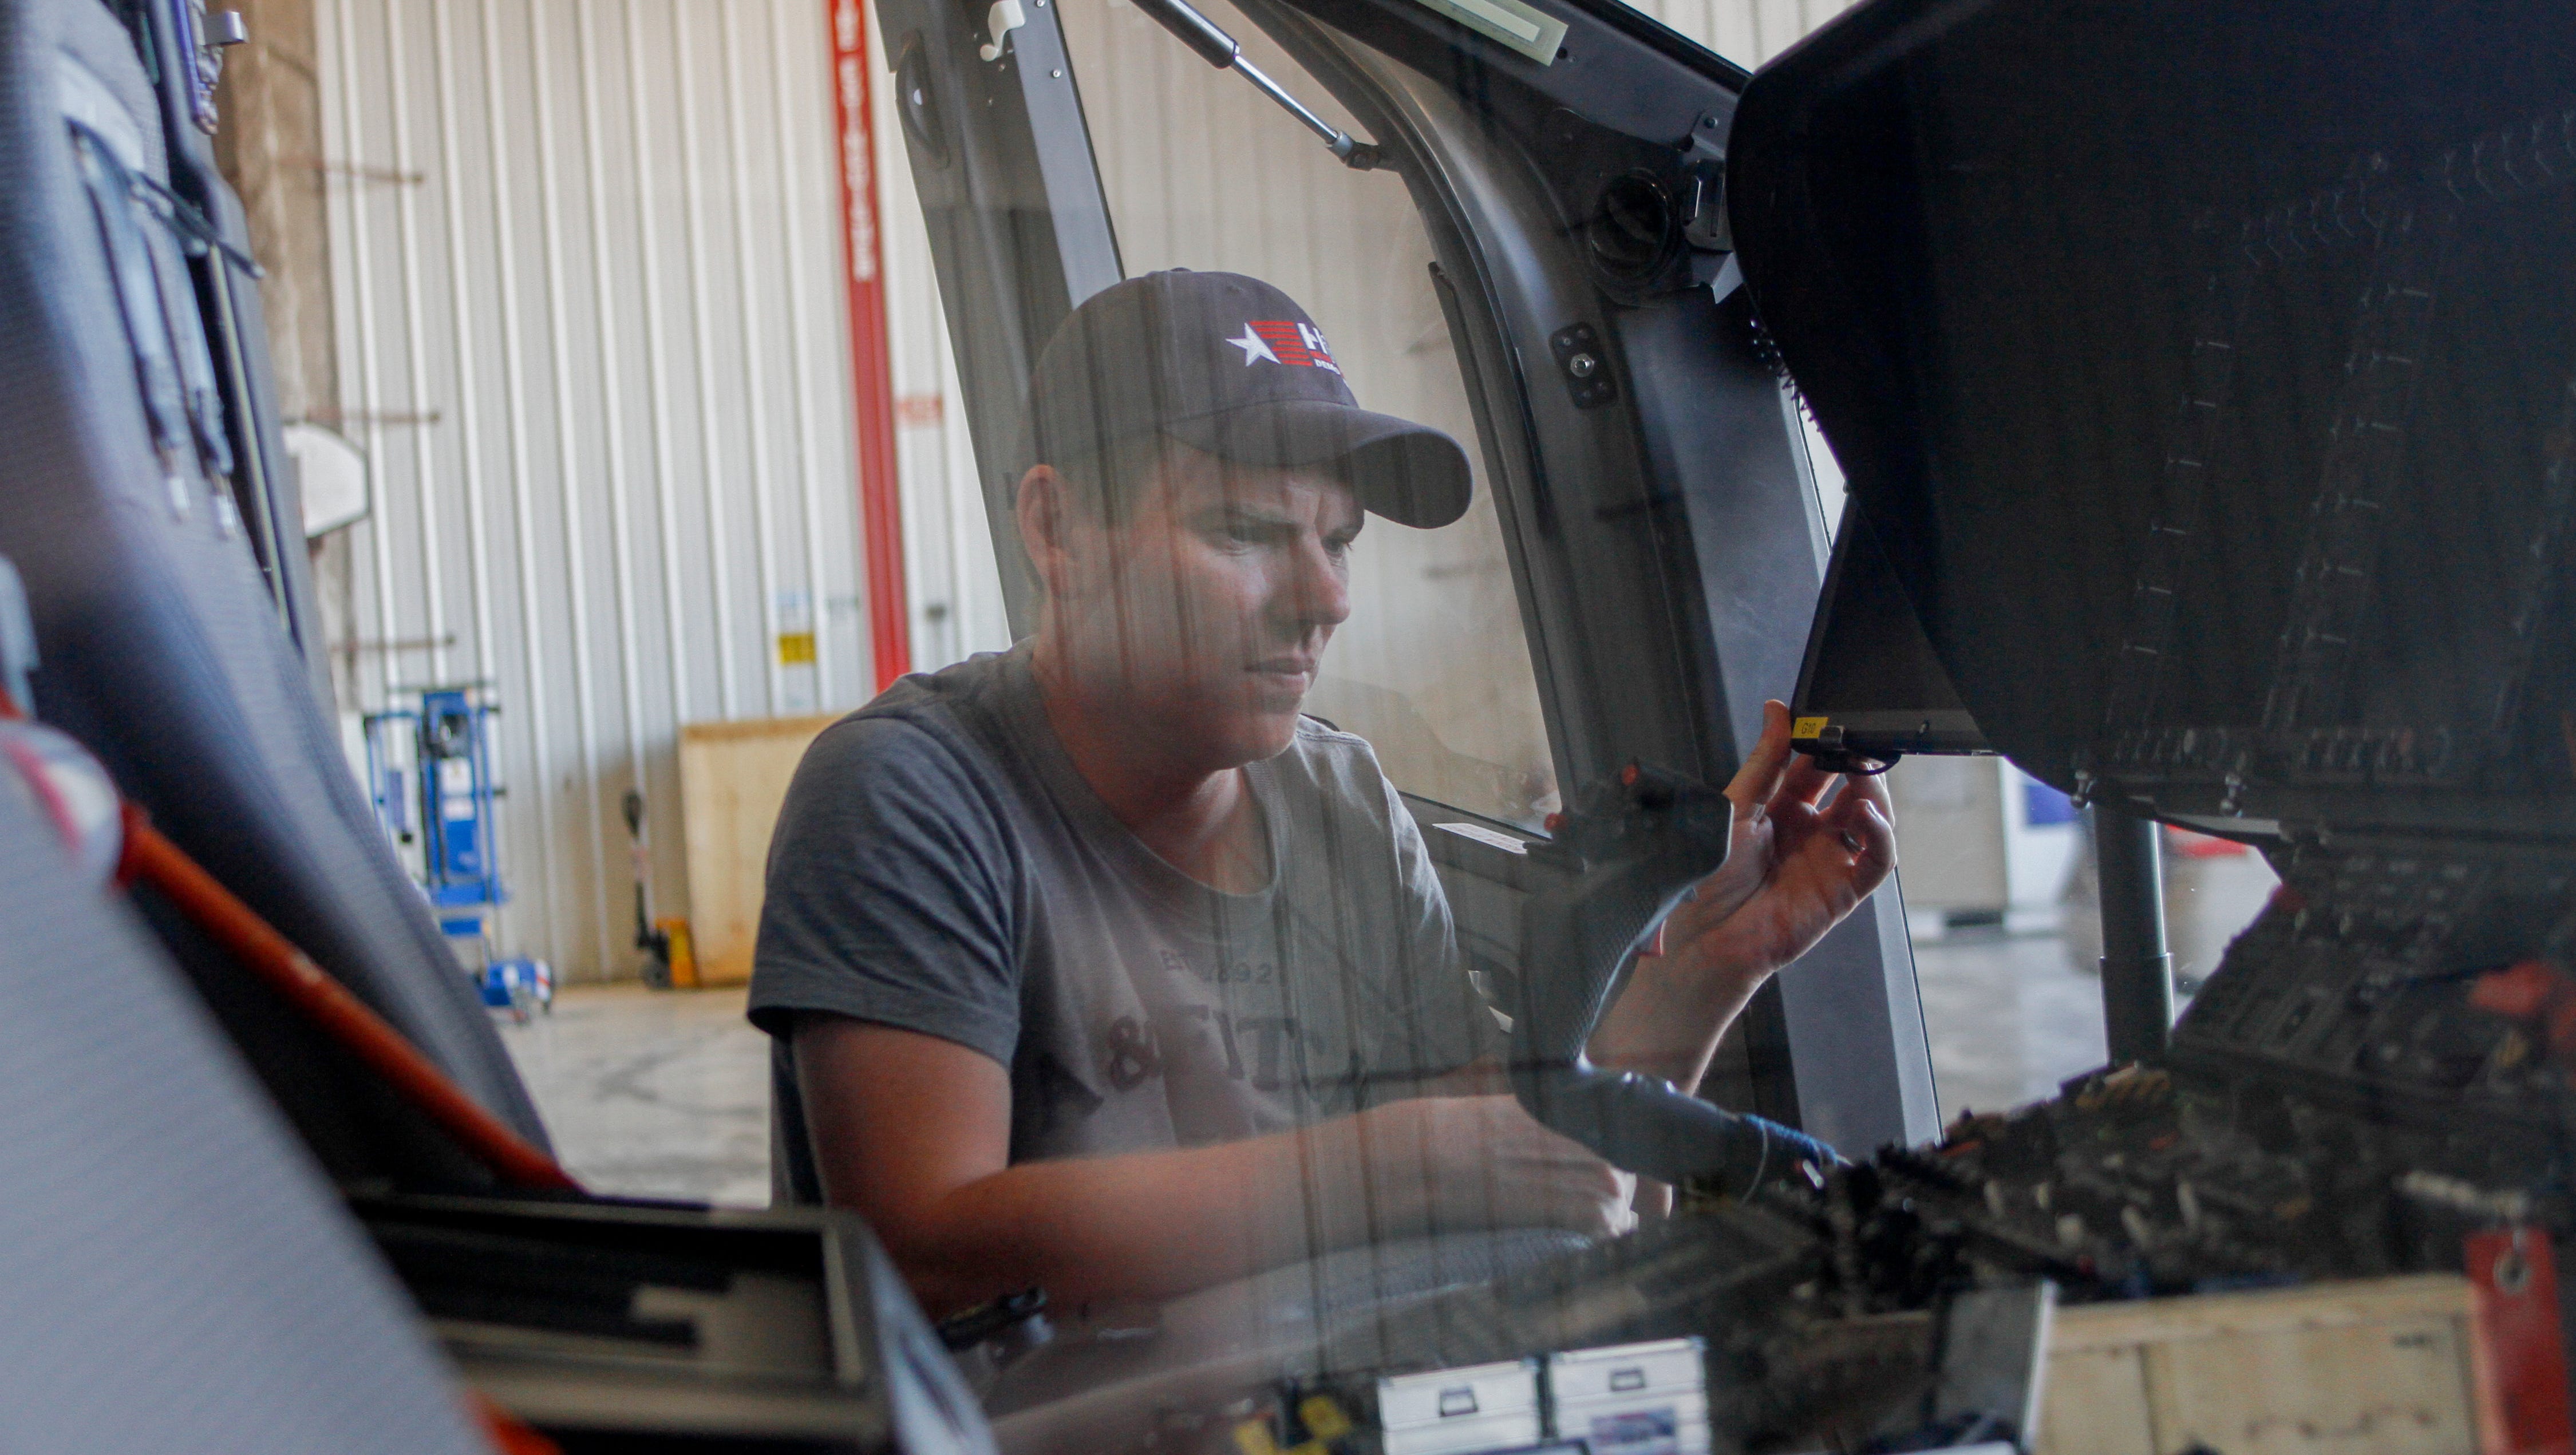 Gregory LePage, a flight test instrumentation engineer for Airbus Helicopters, works on the H160 helicopter Tuesday at the Four Corners Regional Airport in Farmington.